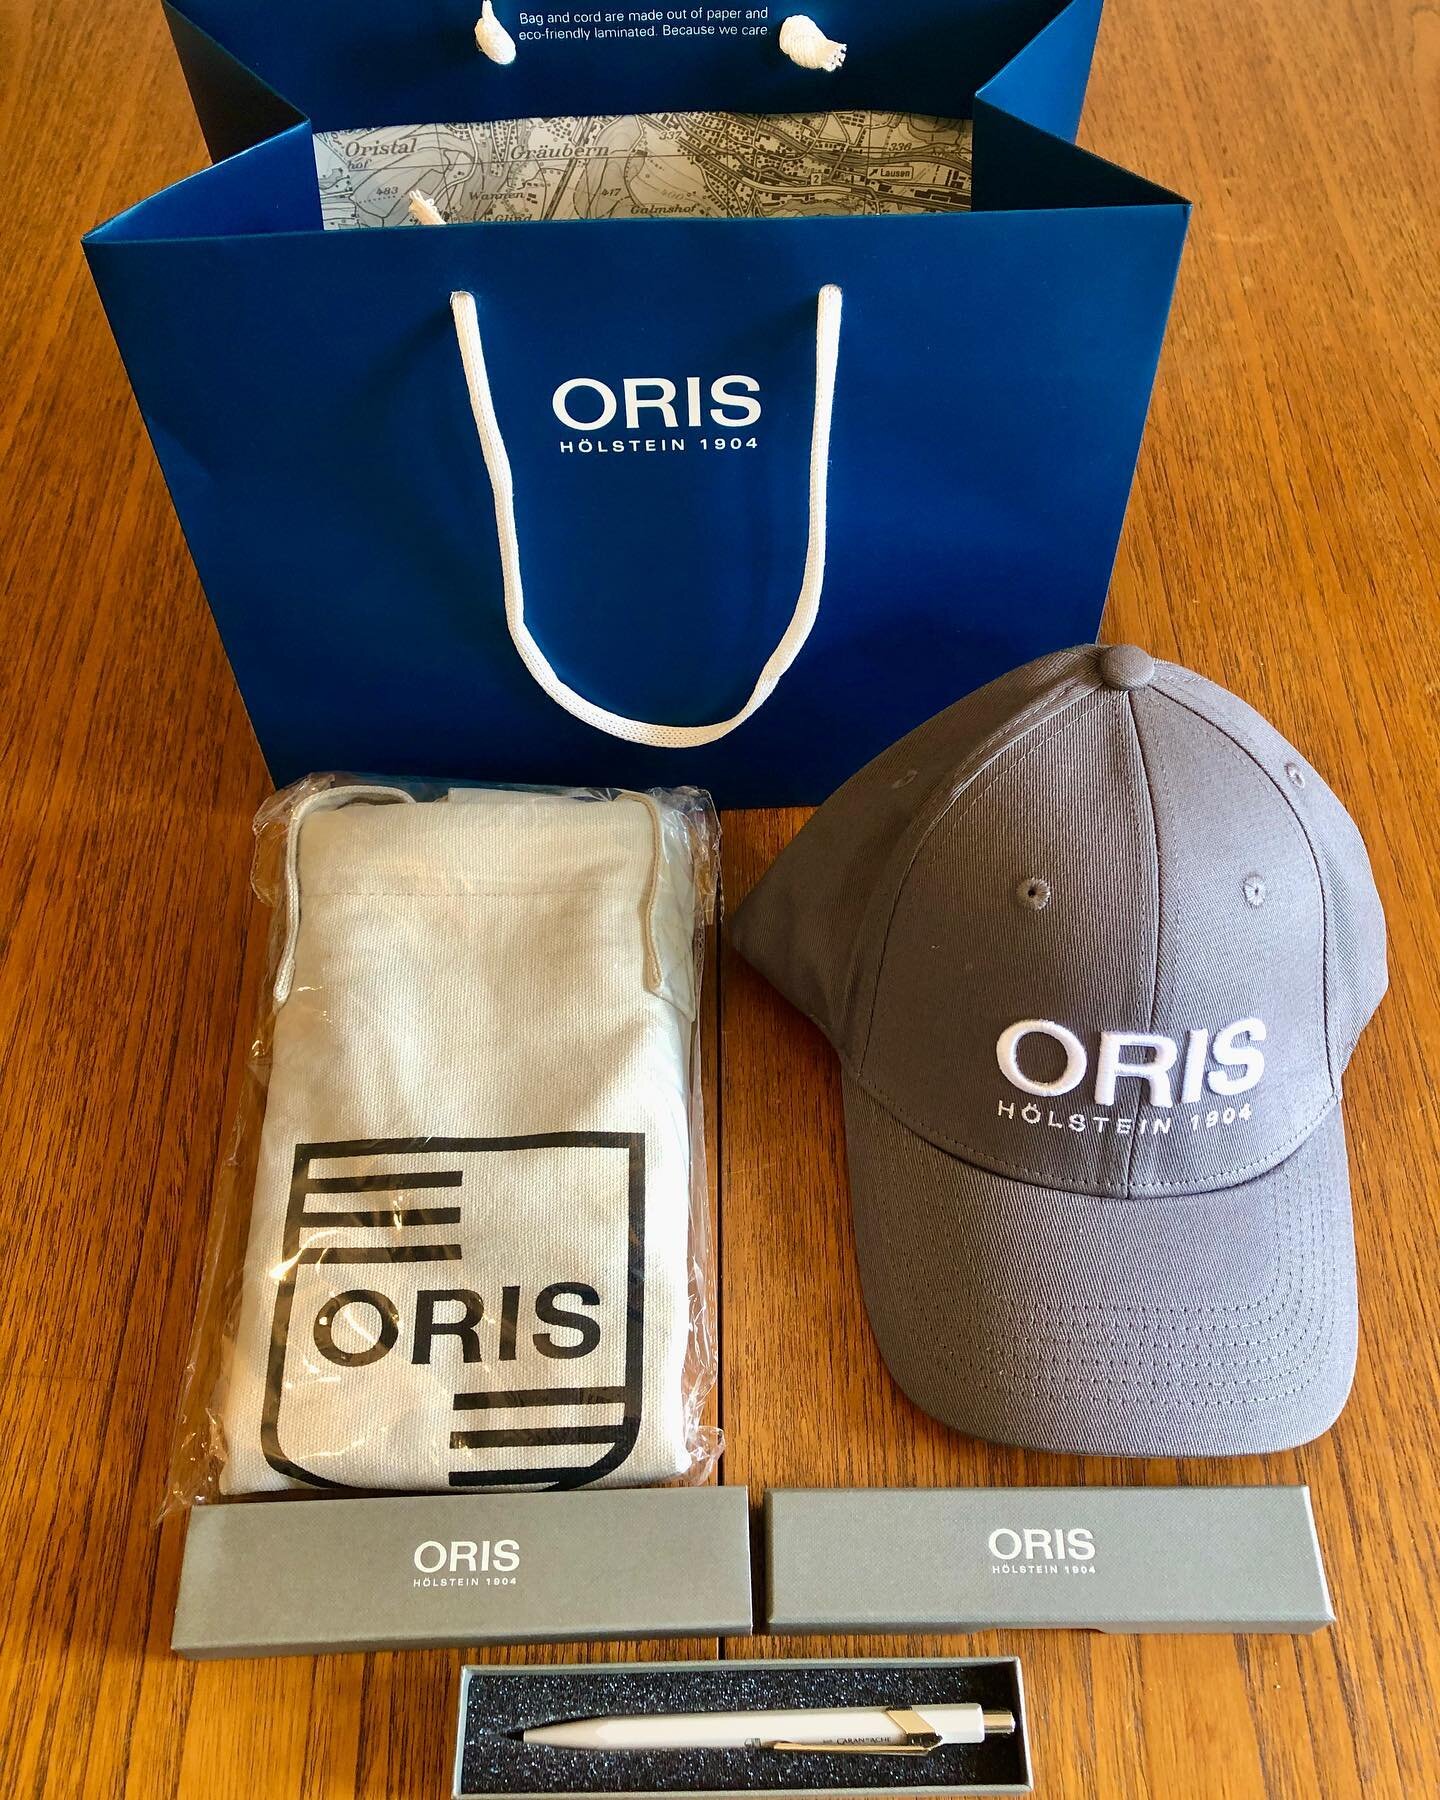 Was lovely to be part of an amazing event yesterday at @oris London launching a new watch 🕰 and thank you so much for our goody bags 🙌🏼

Videos coming soon 🎺🎙🎷